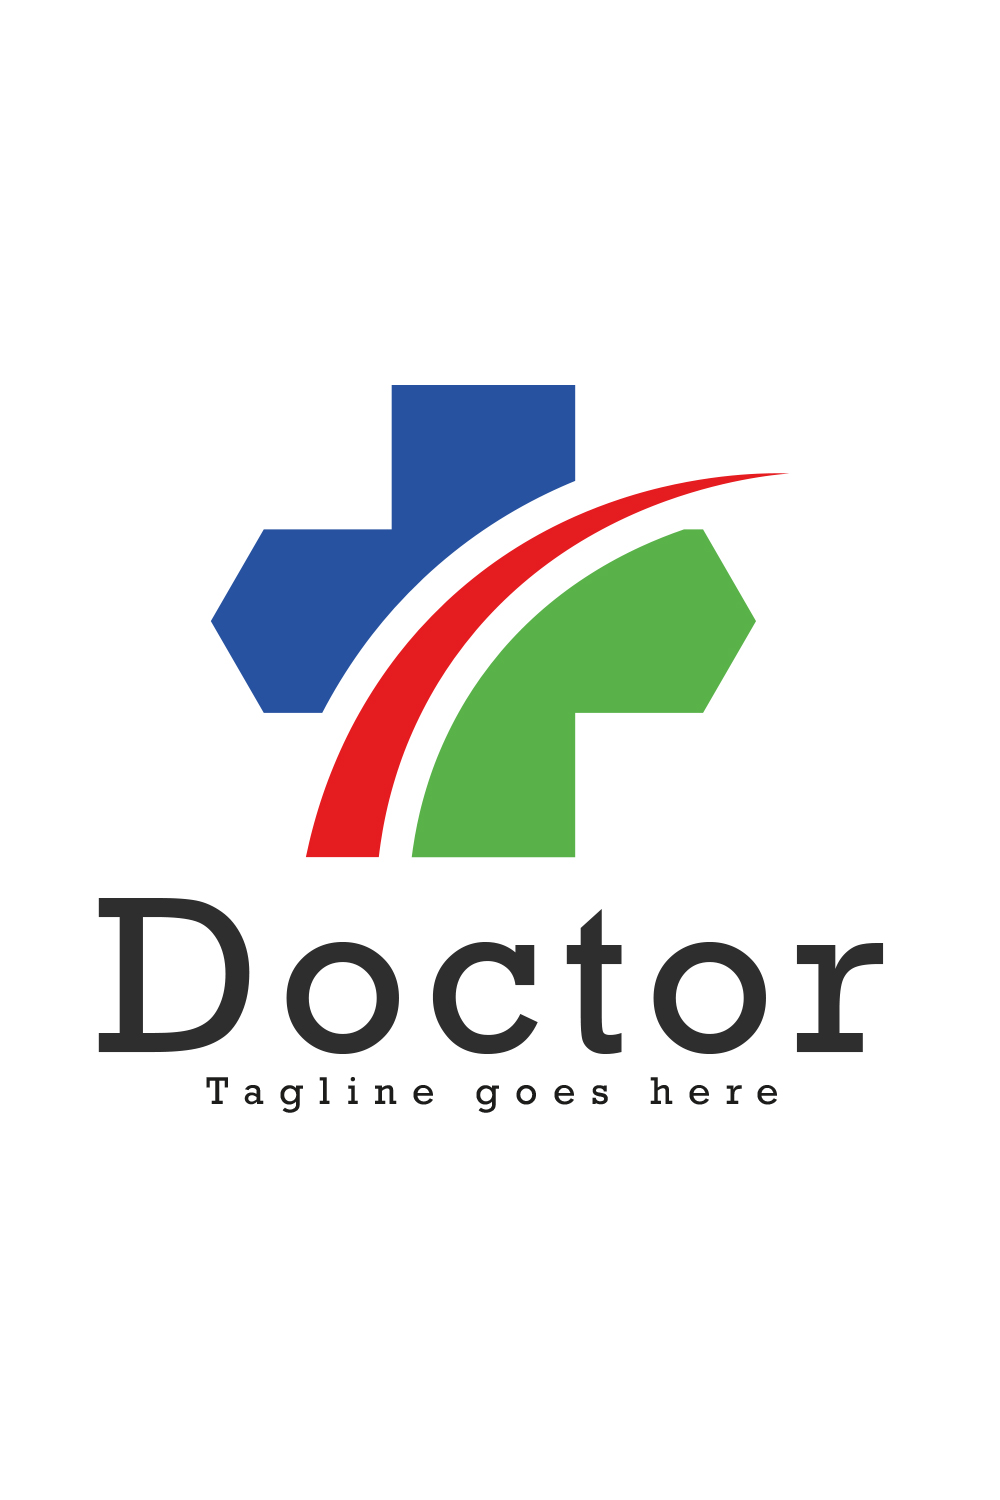 Logo design for doctor clinic and related businesses pinterest preview image.